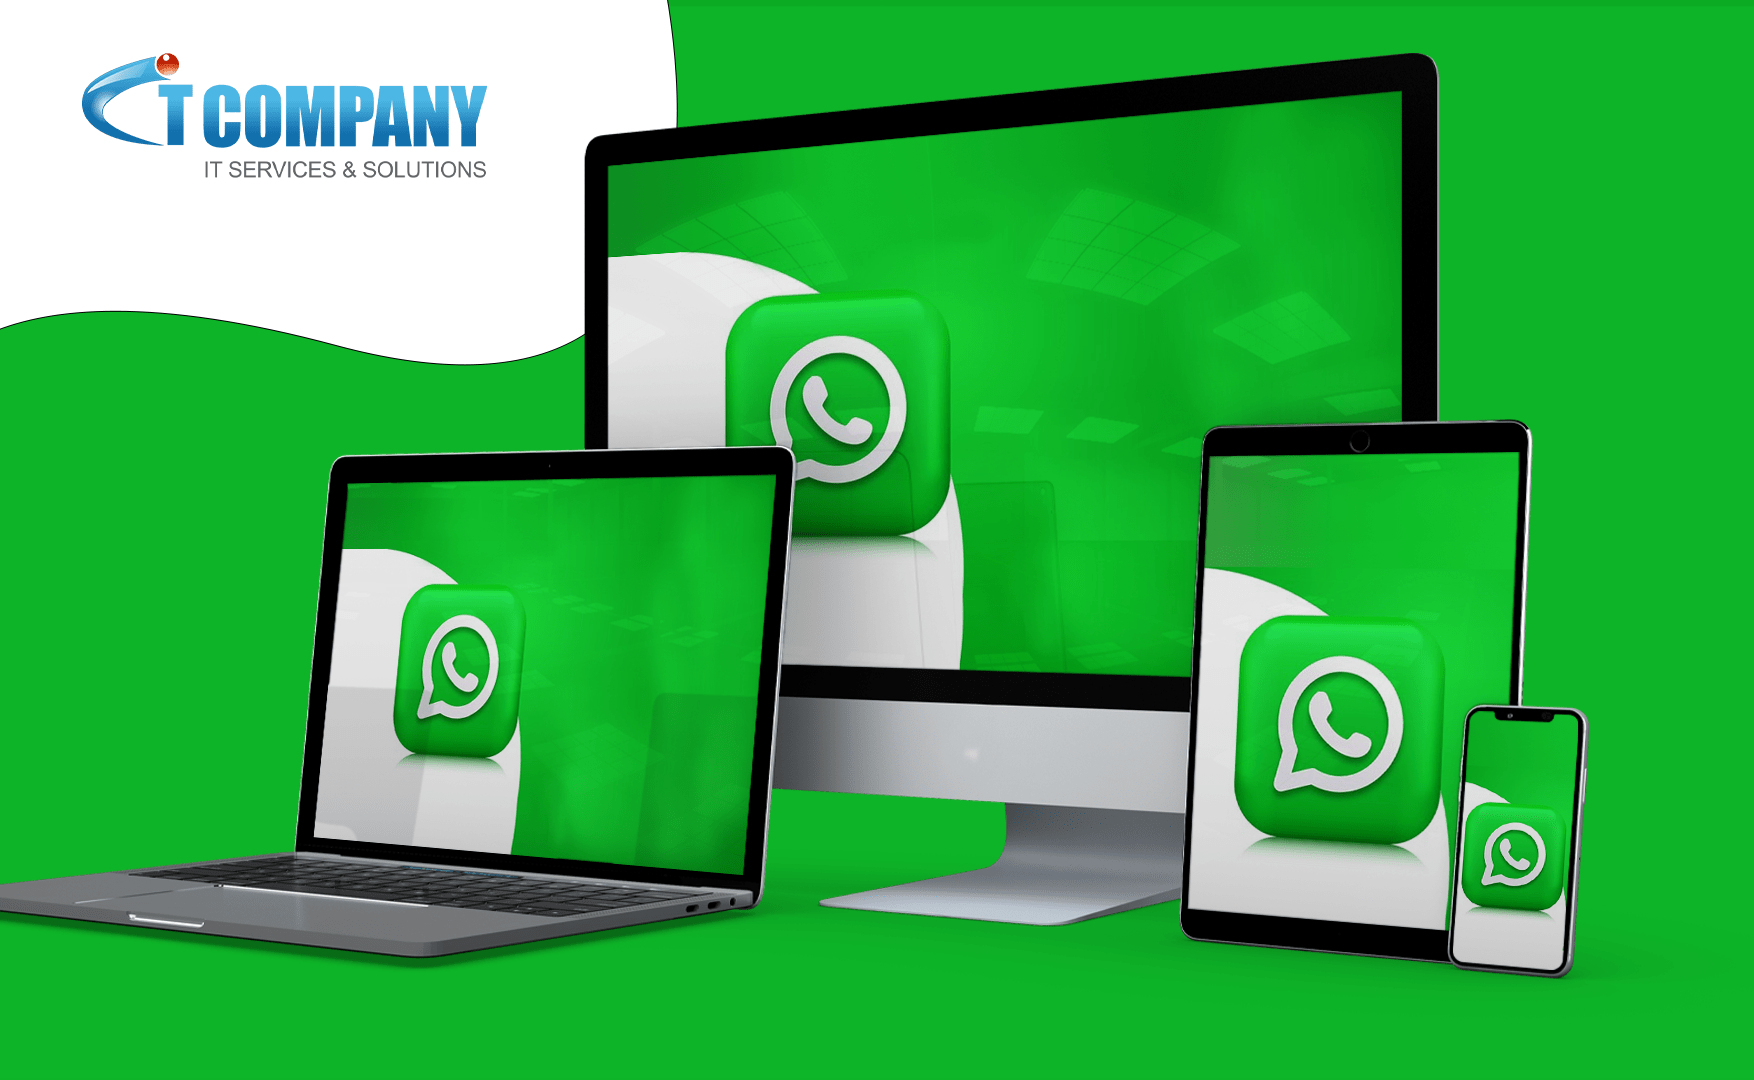 WhatsApp Will Be Available on a Variety of Devices Soon